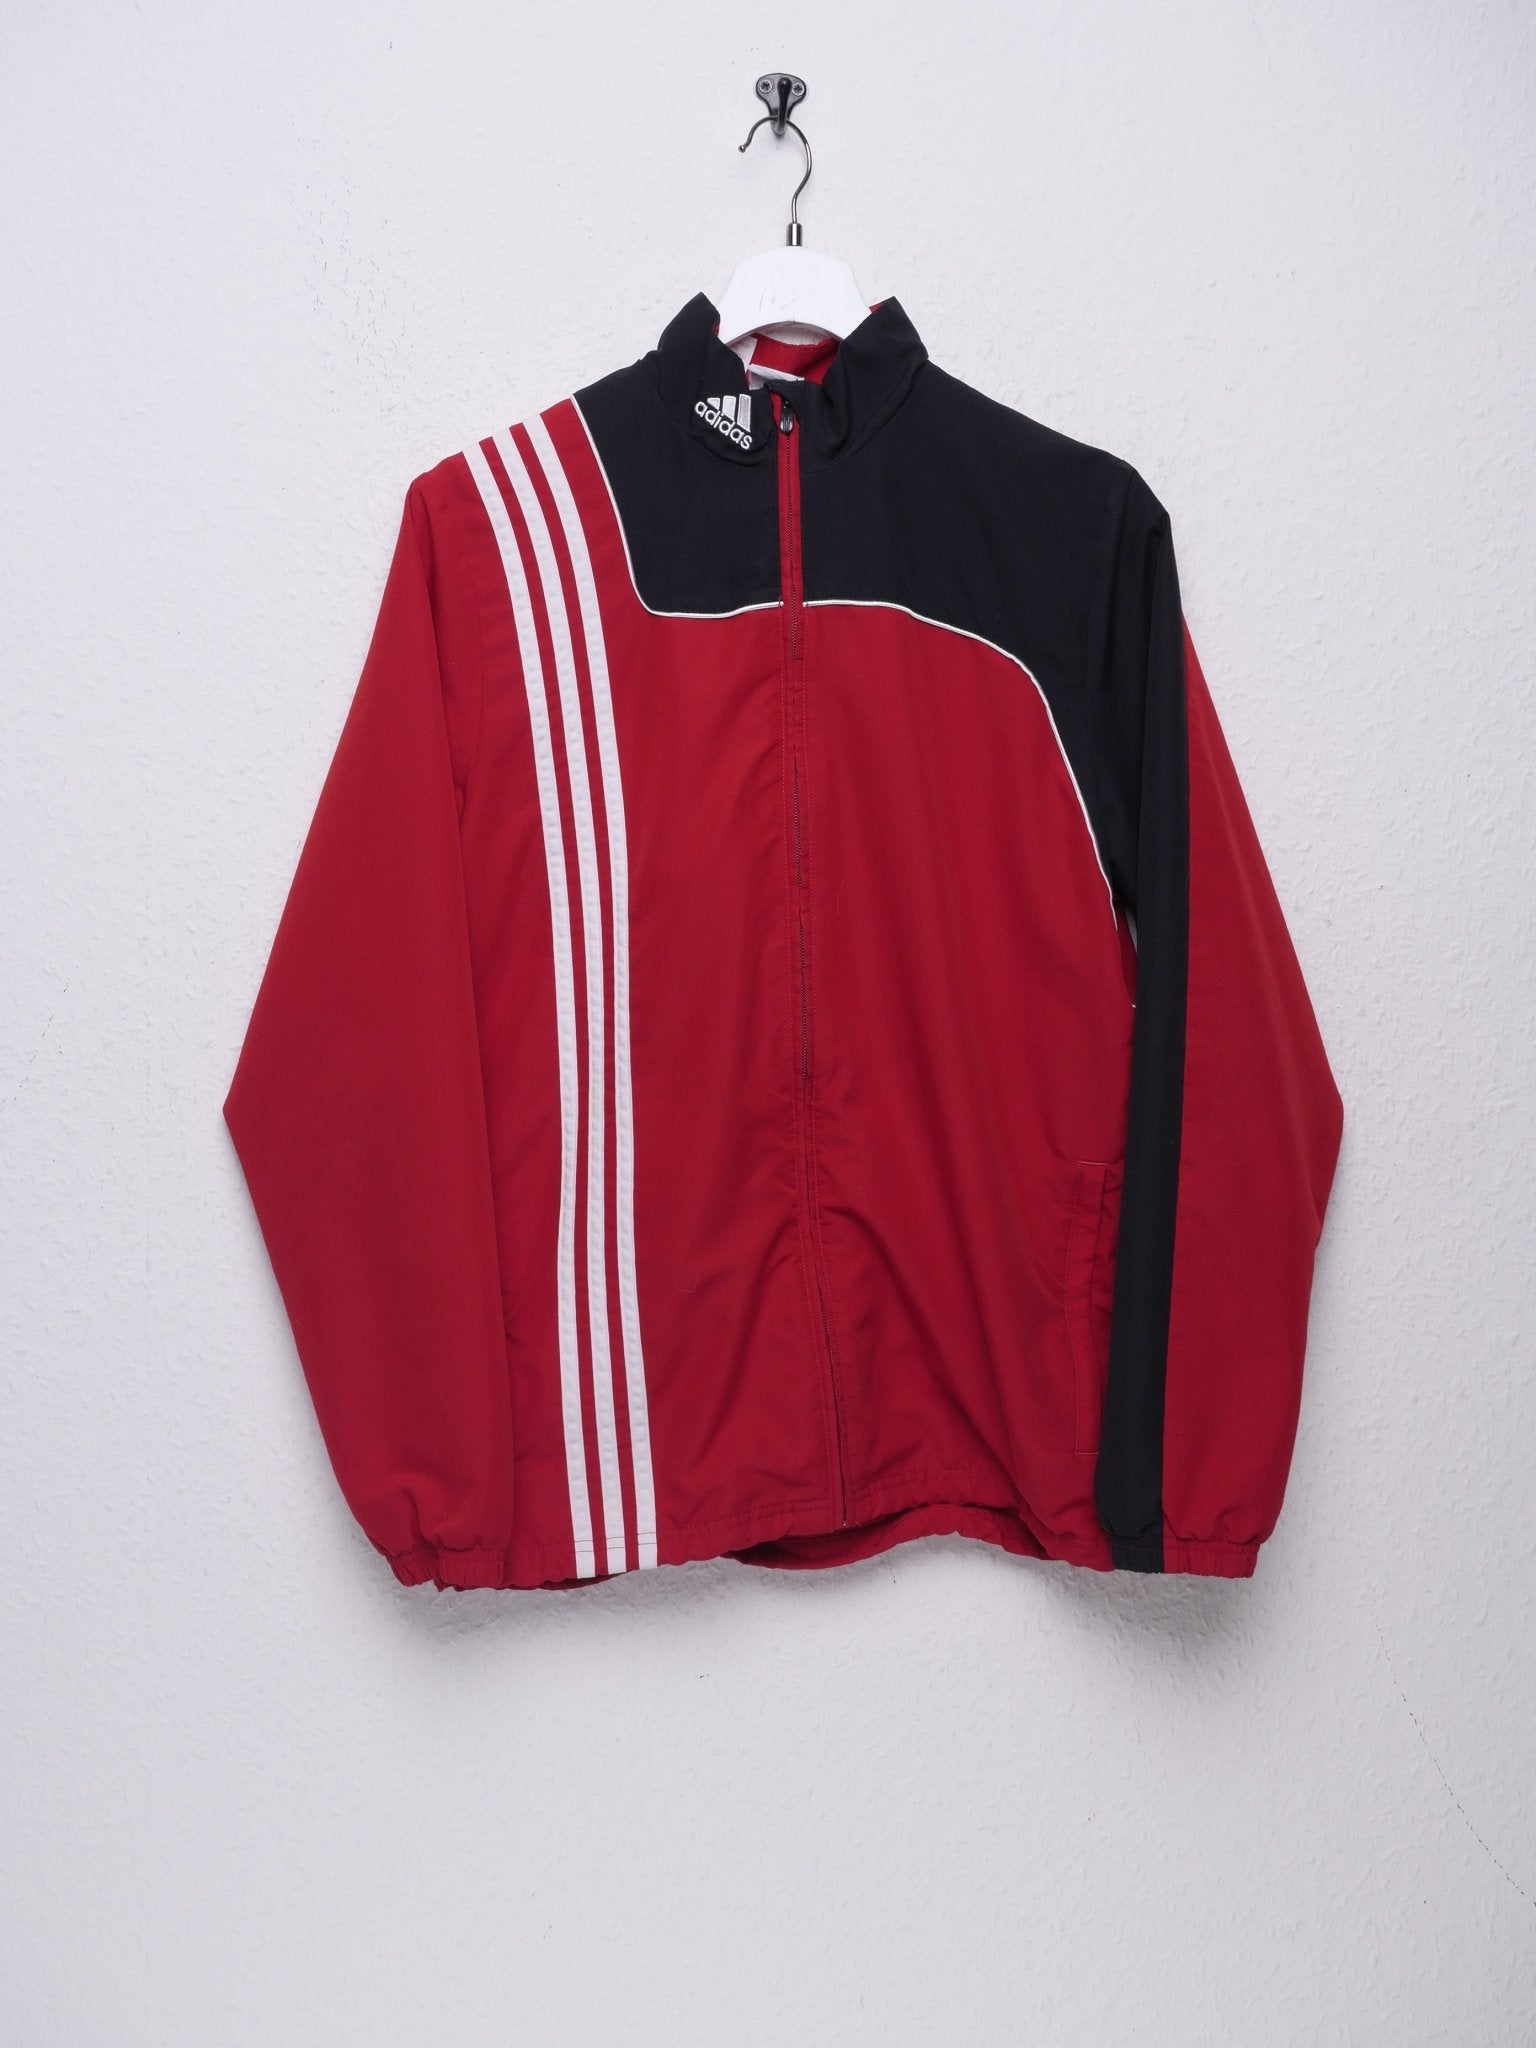 Adidas embroidered Logo 'JFG 3 Schlösser-Eck 07' Soccer two toned Track Jacket - Peeces